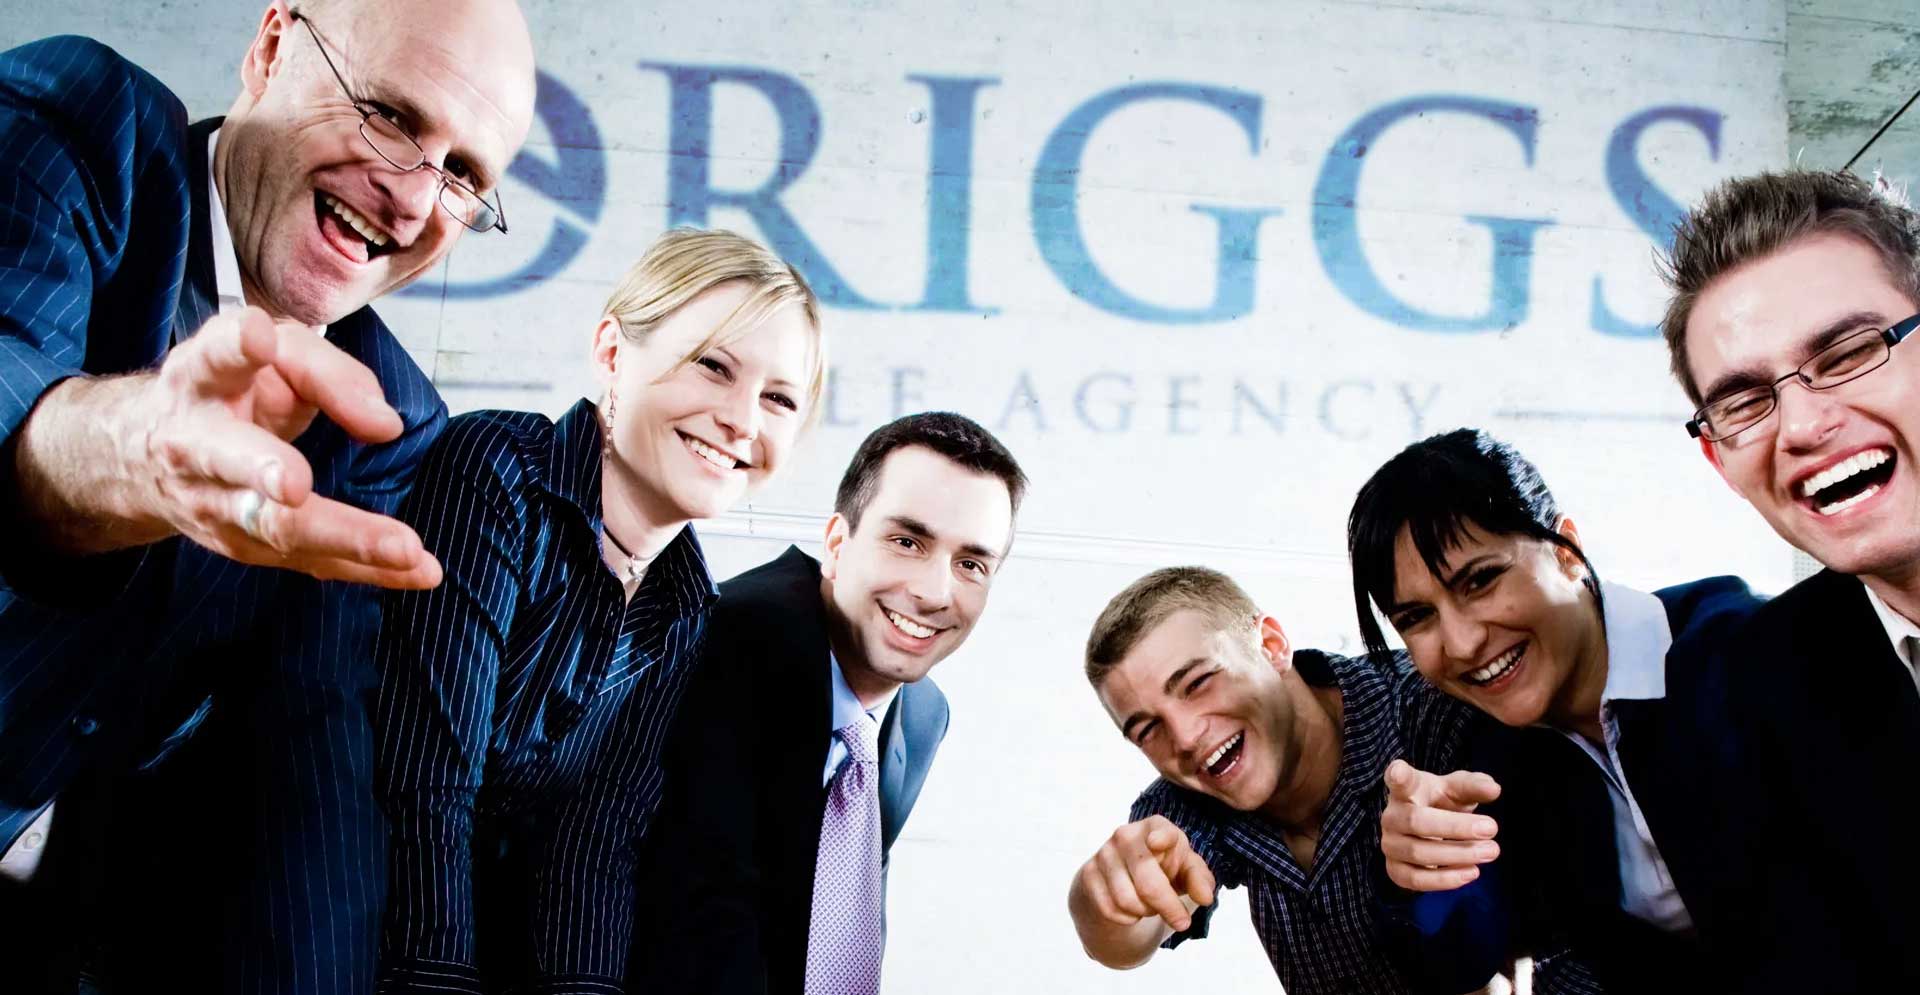 Driggs Title Agency